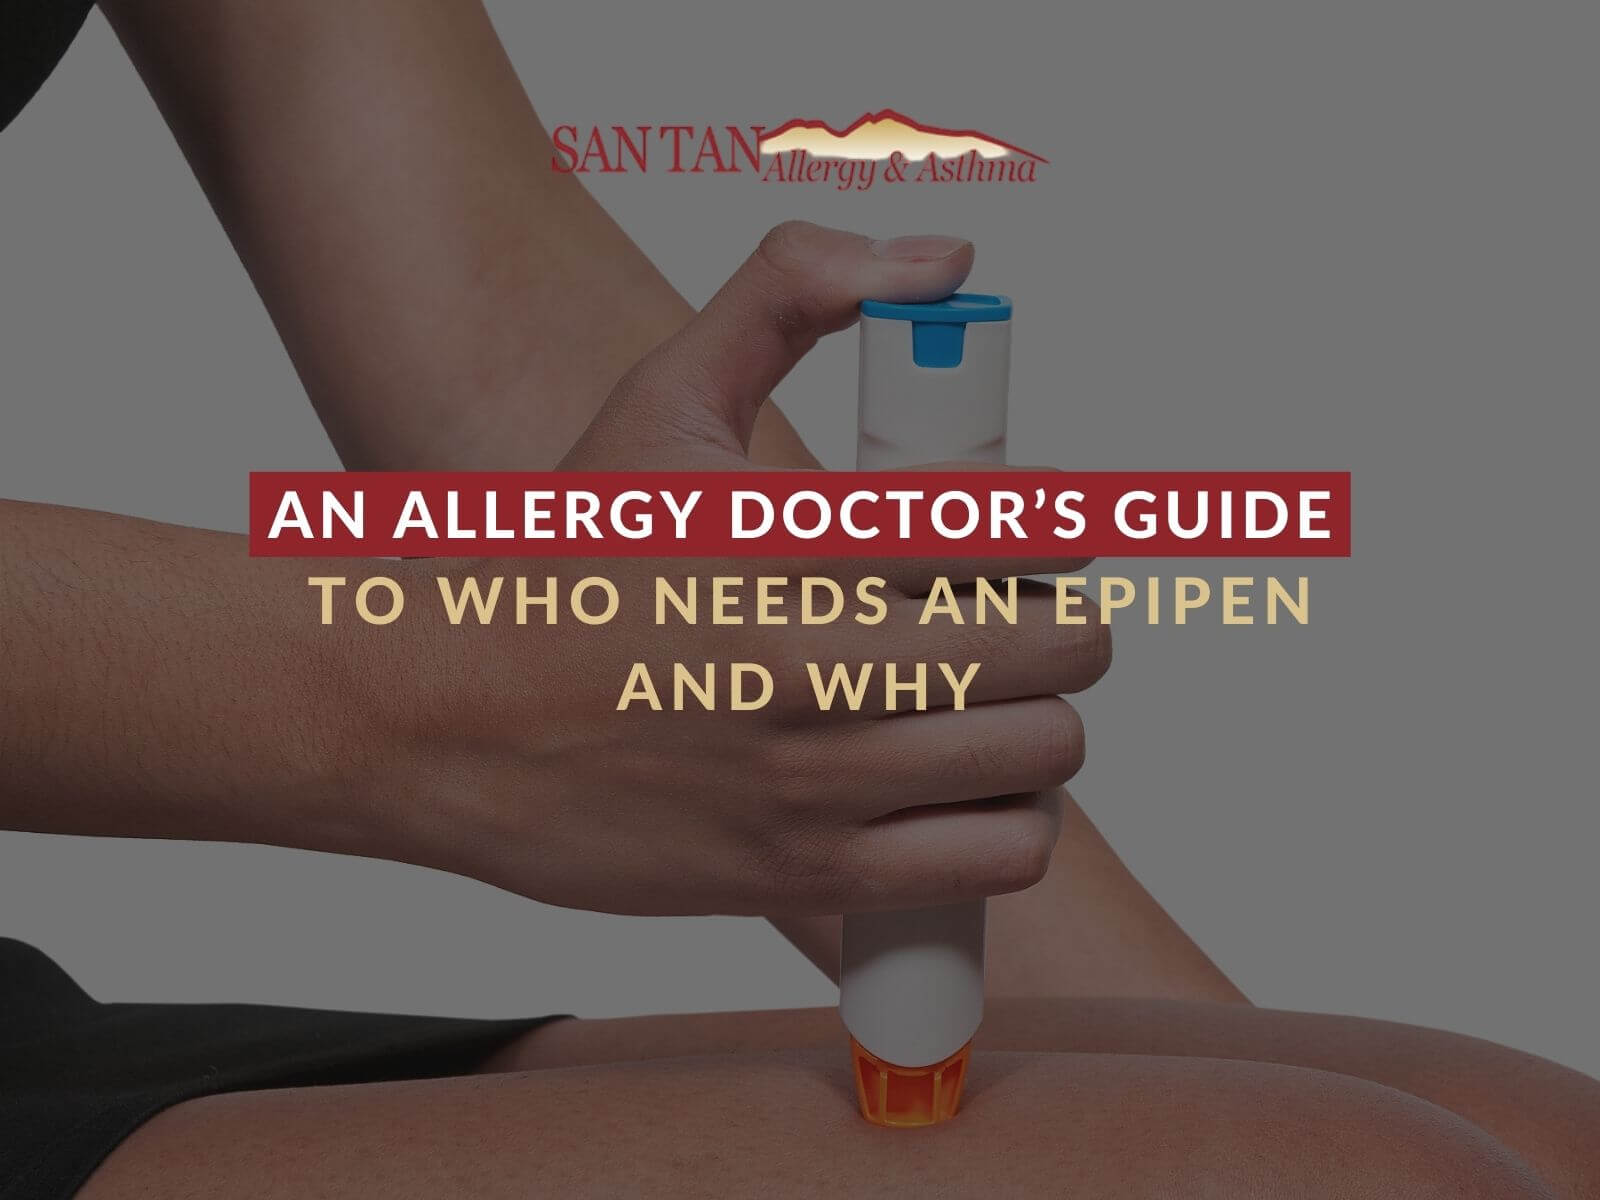 An Allergy Doctor’s Guide to Who Needs an EpiPen and Why